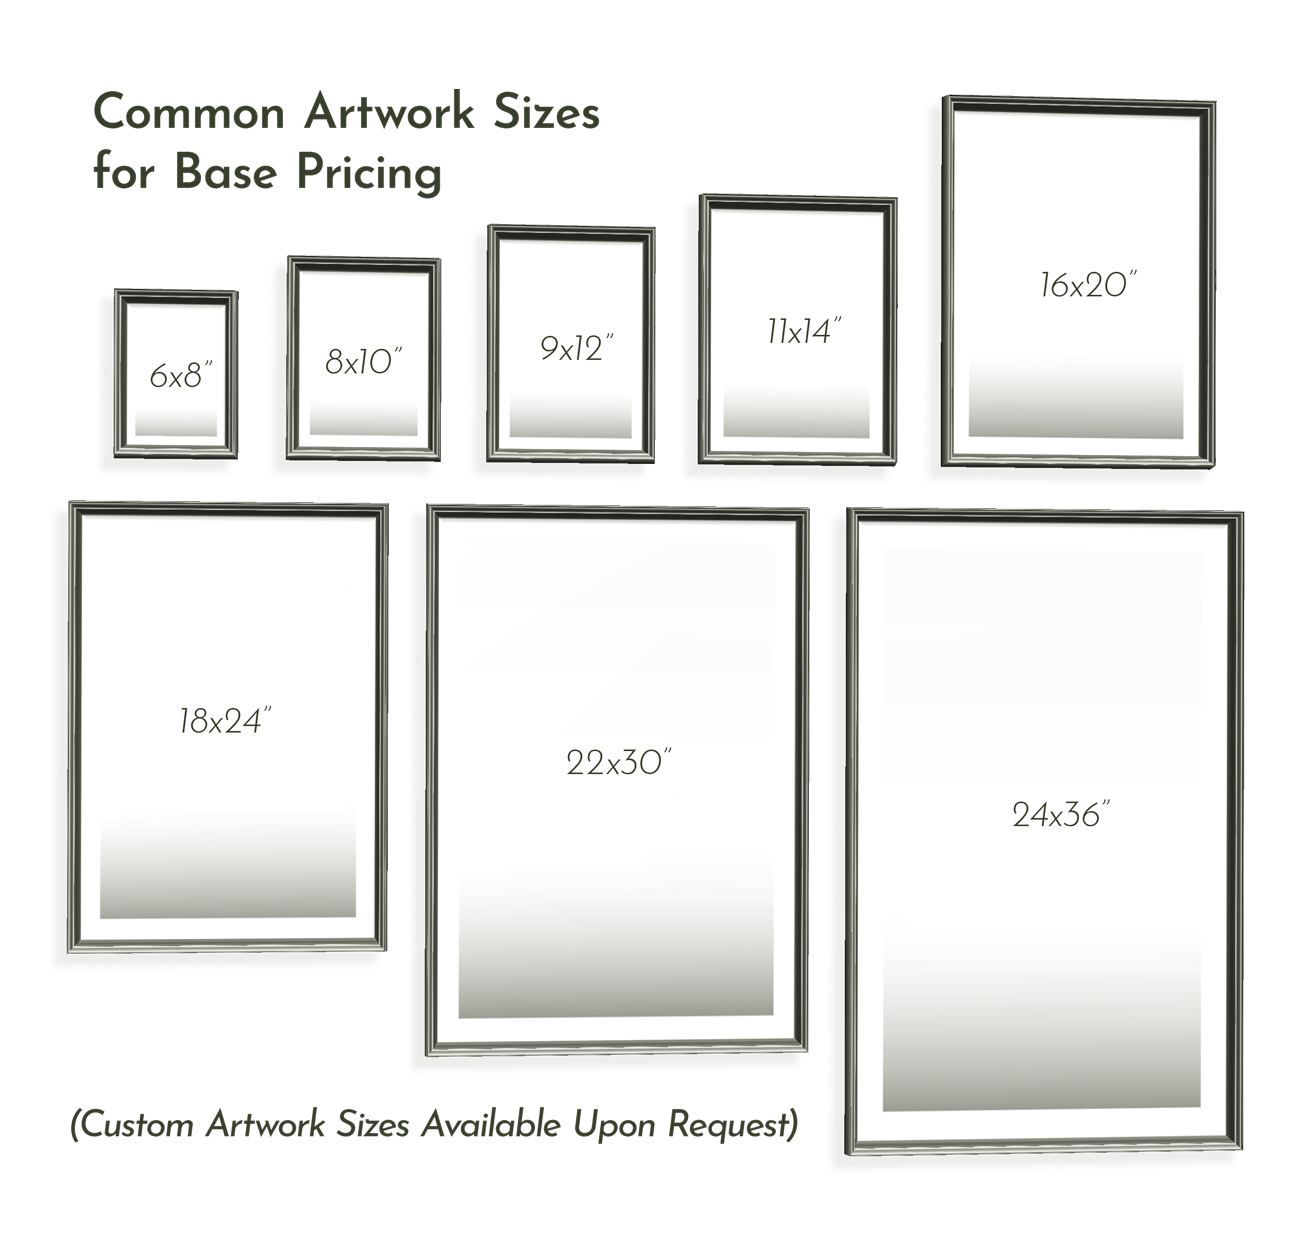 Common Artwork Sizes for Base Pricing